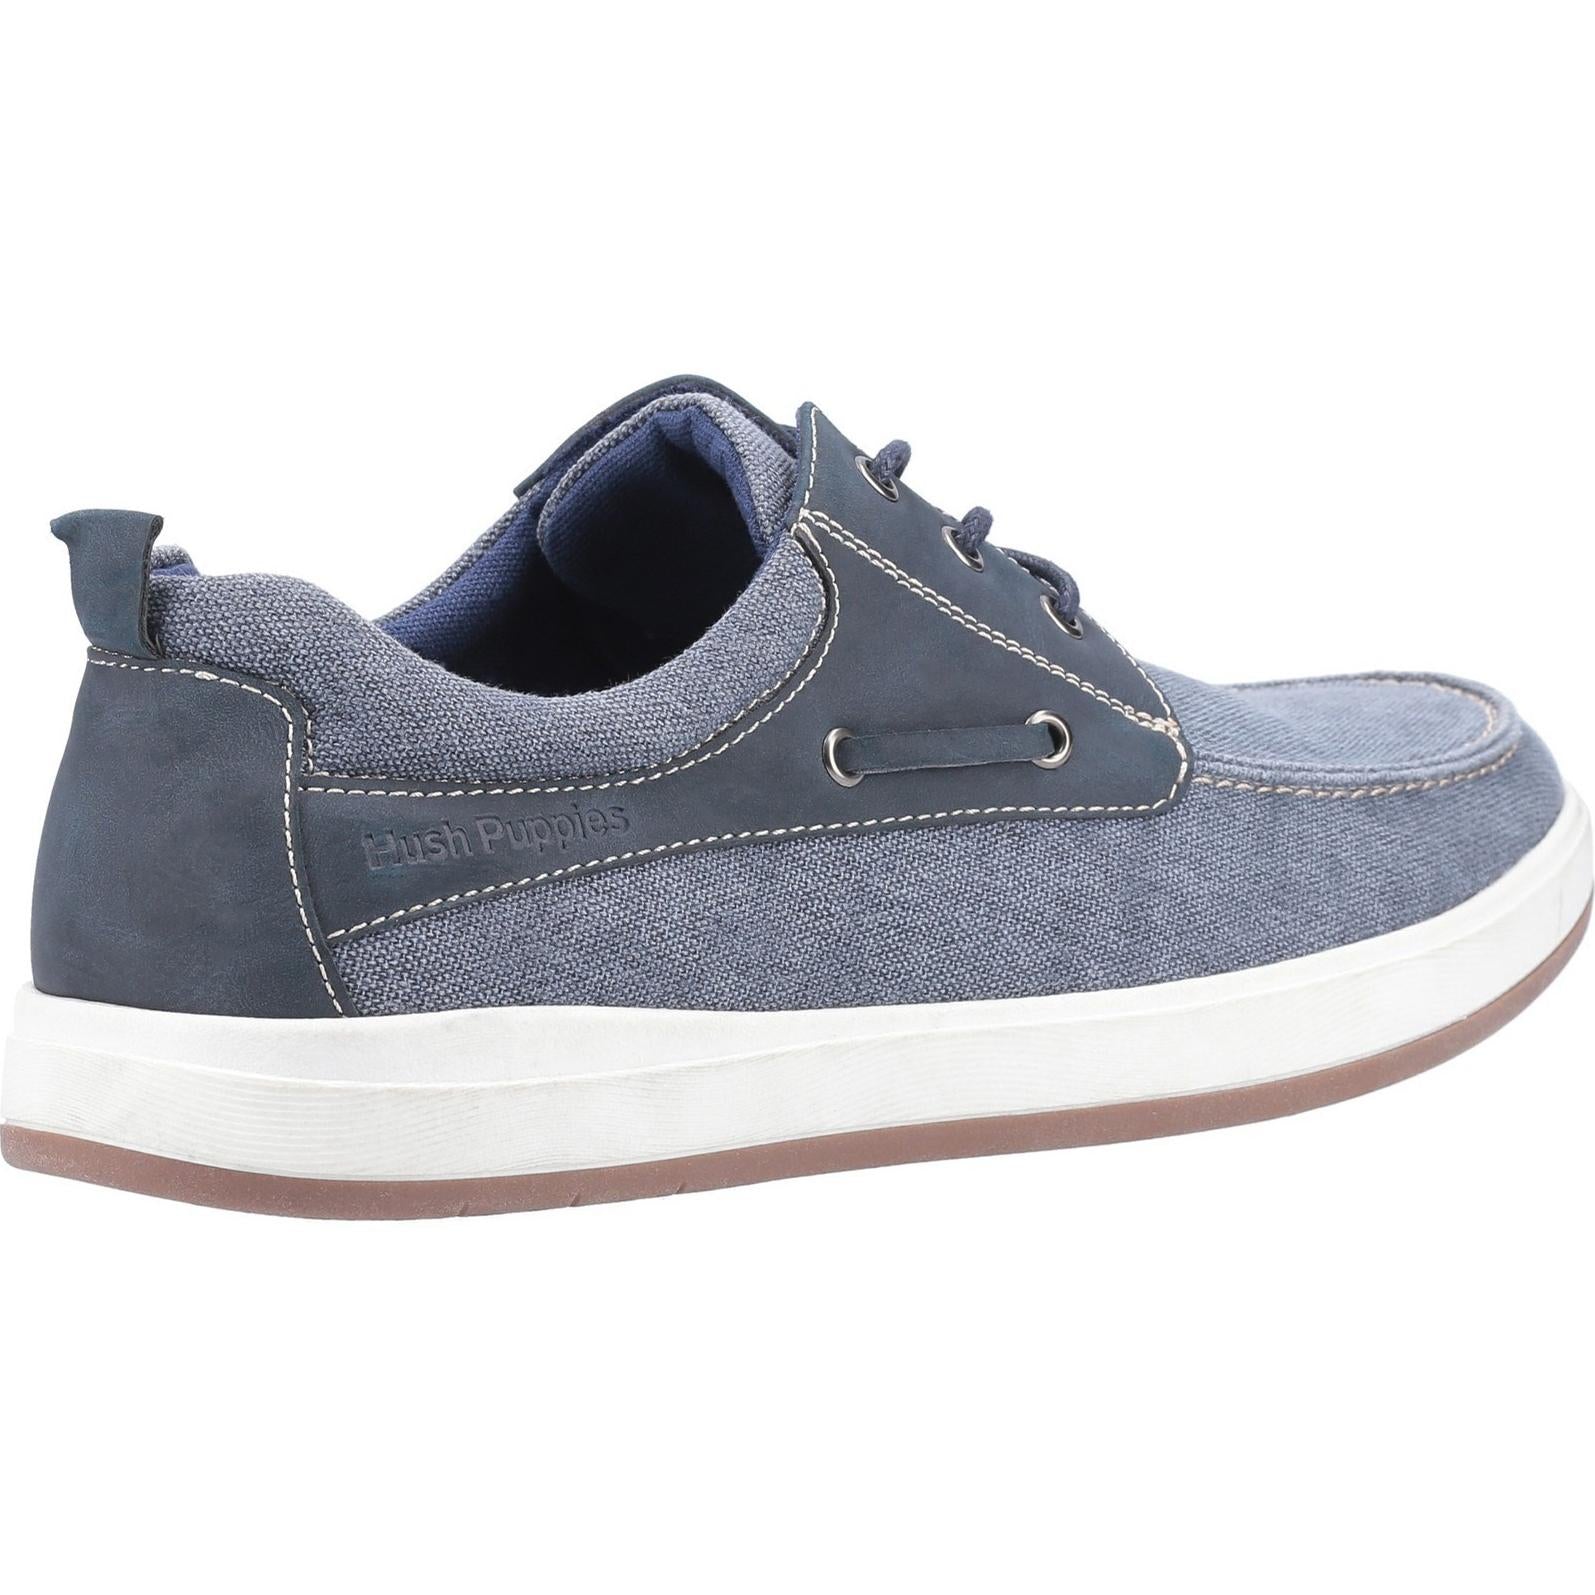 Hush Puppies Aiden Lace Up Boat Shoe